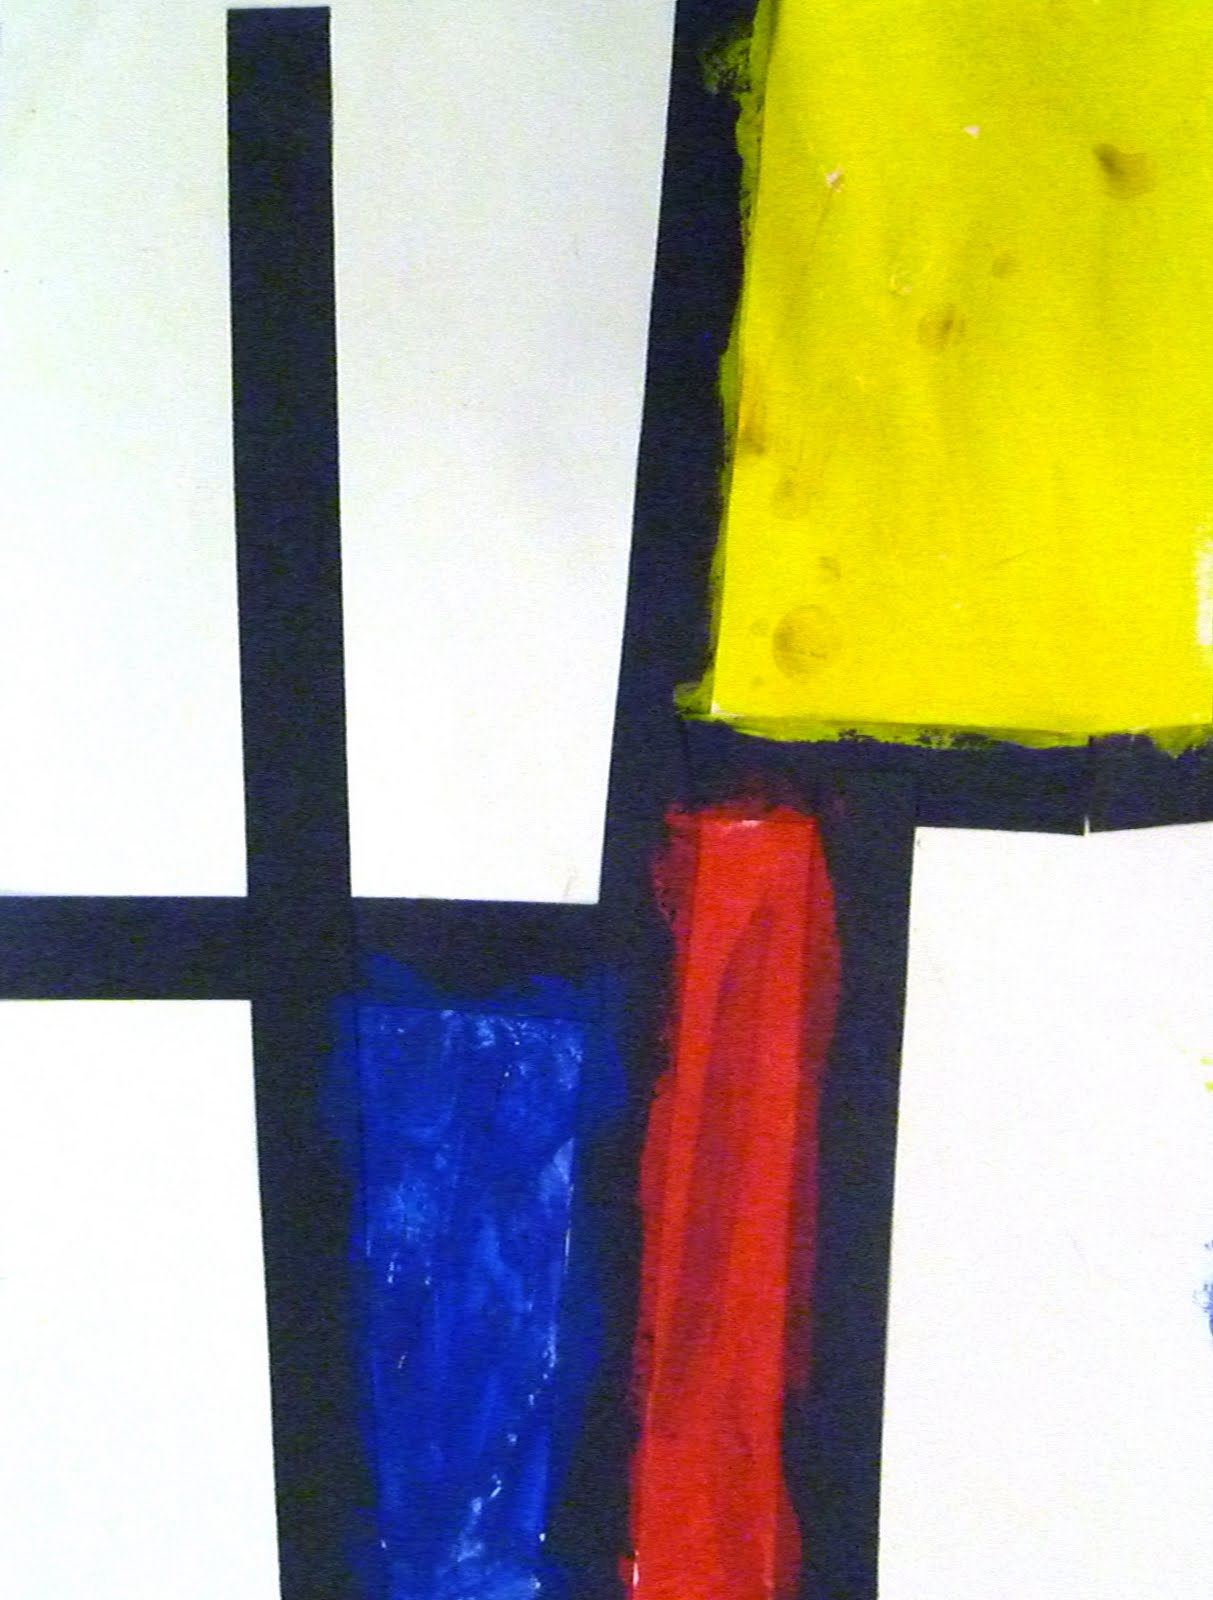 From the Sketchbook of Bridget Smith: Mondrian inspired compositions